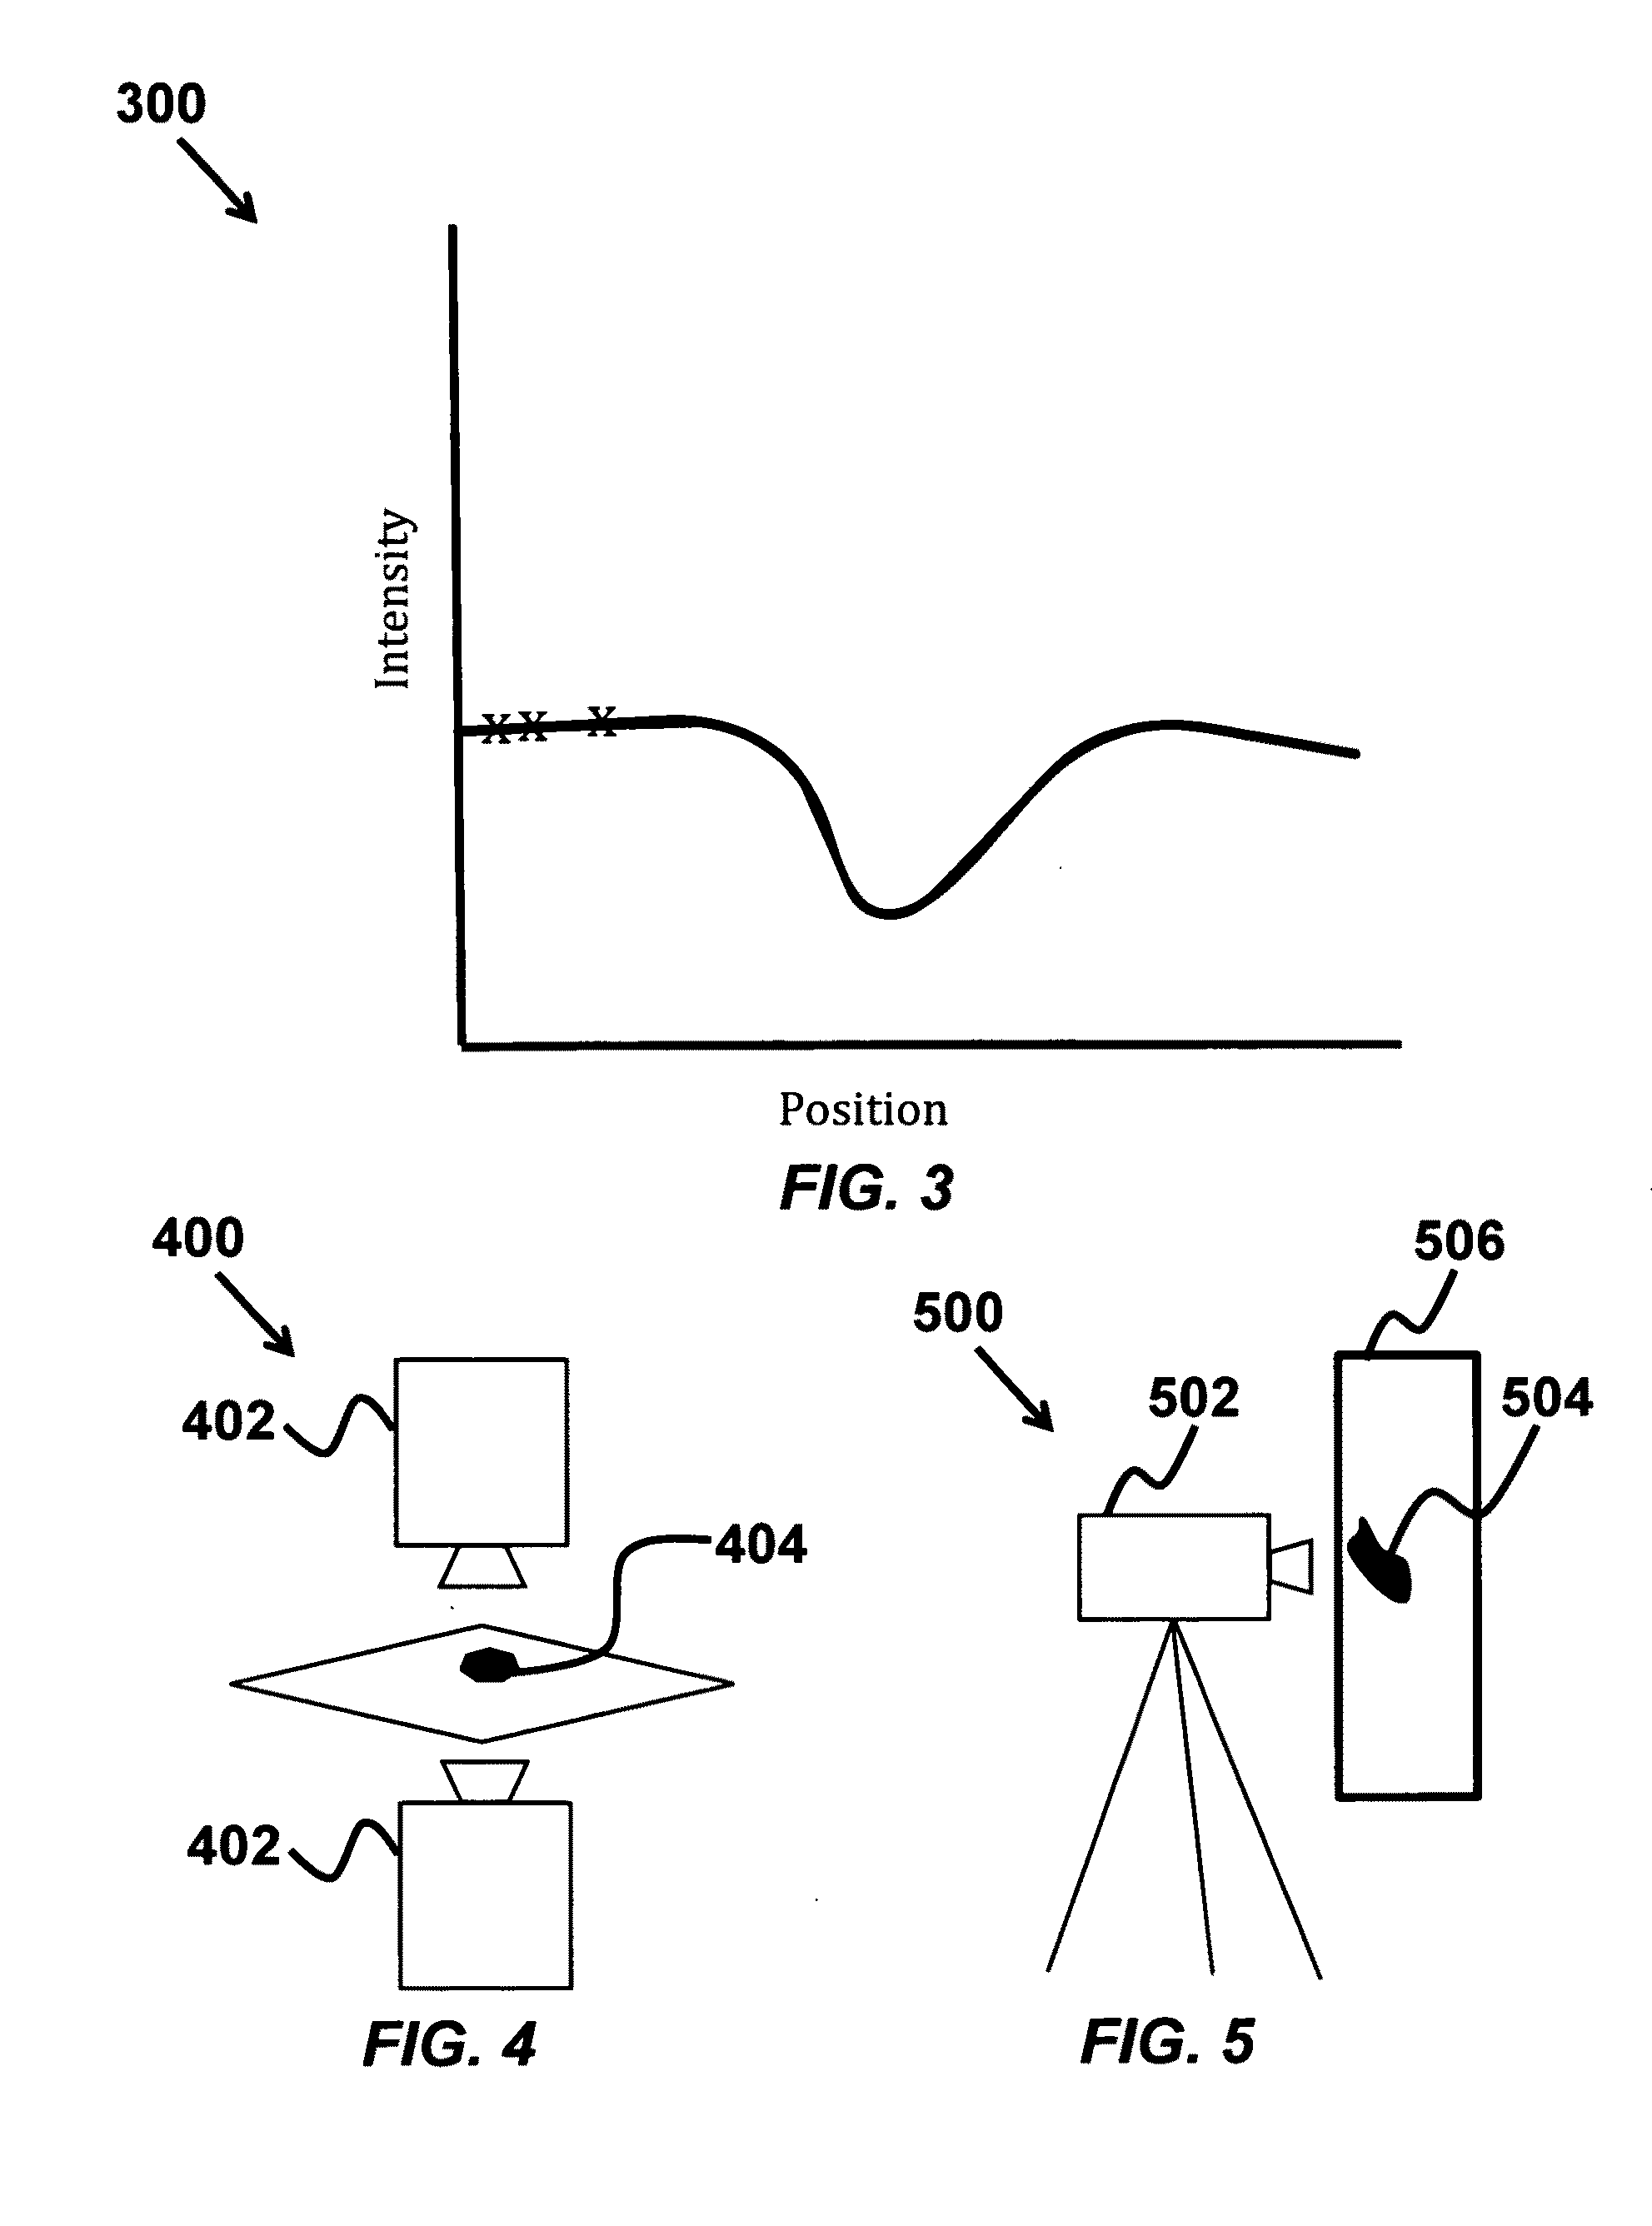 Method for tissue characterization based on beta radiation and coincident Cherenkov radiation of a radiotracer